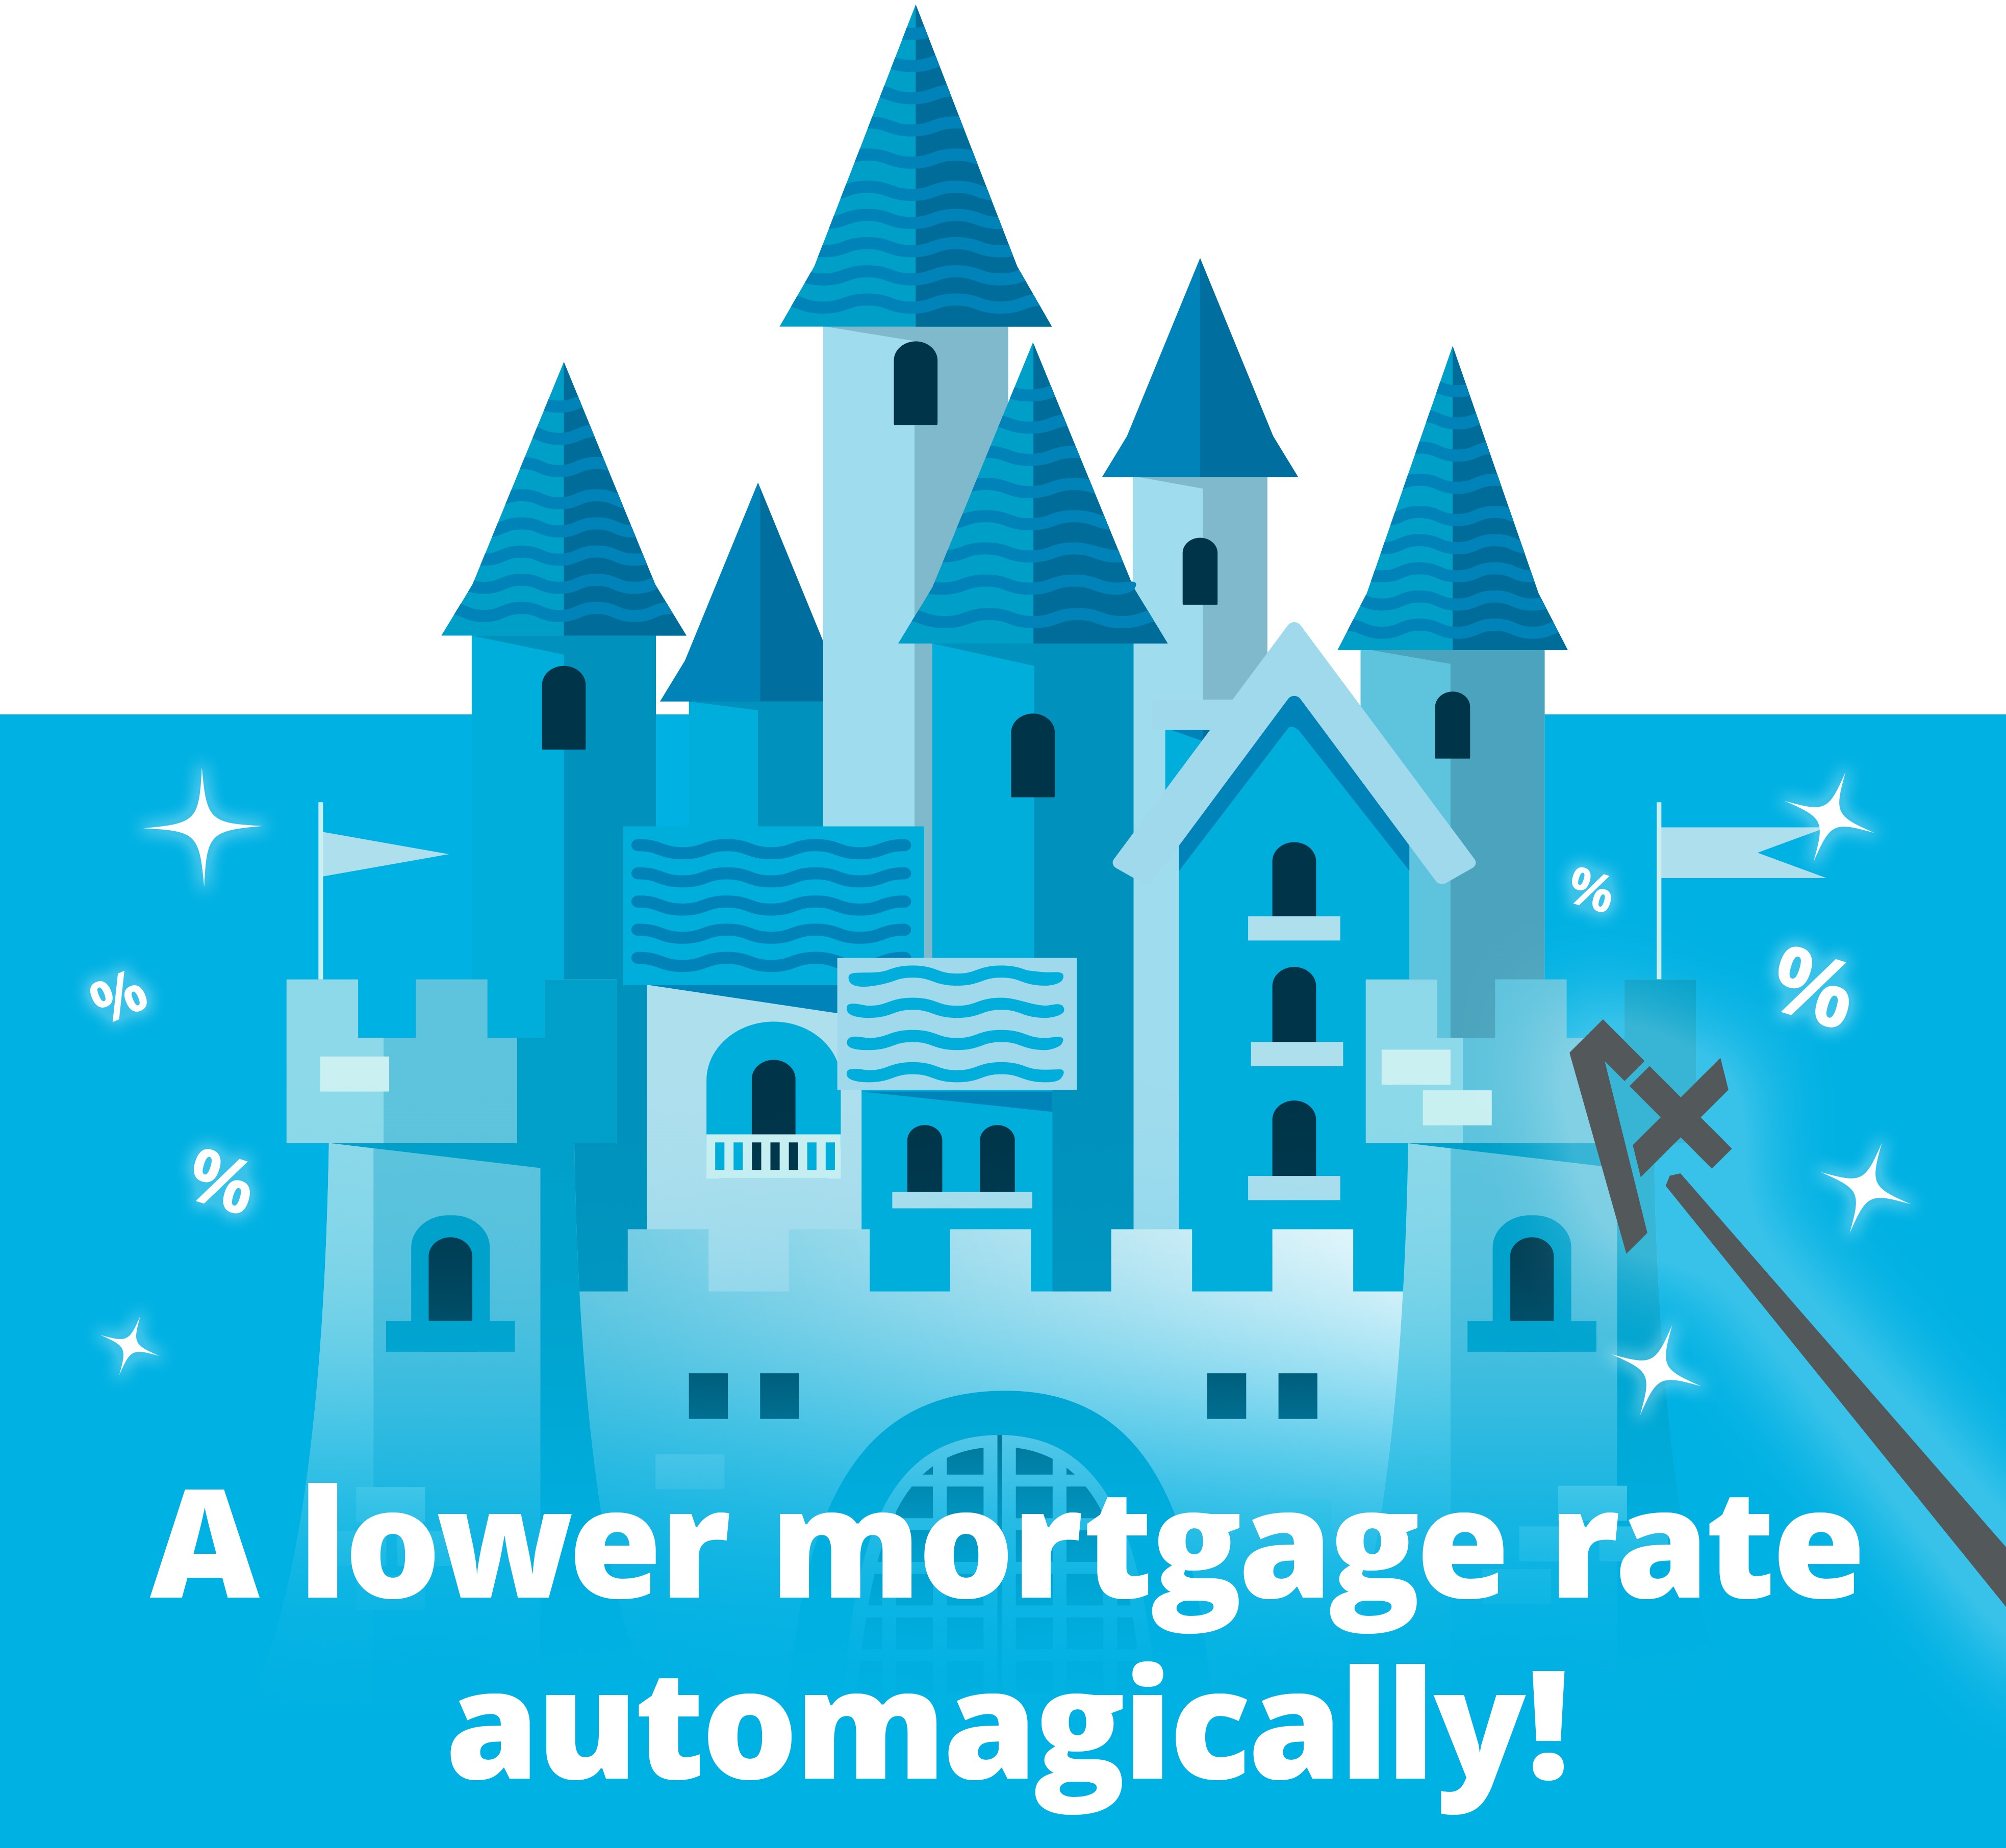 Mortgage Rate Wish is Our Command